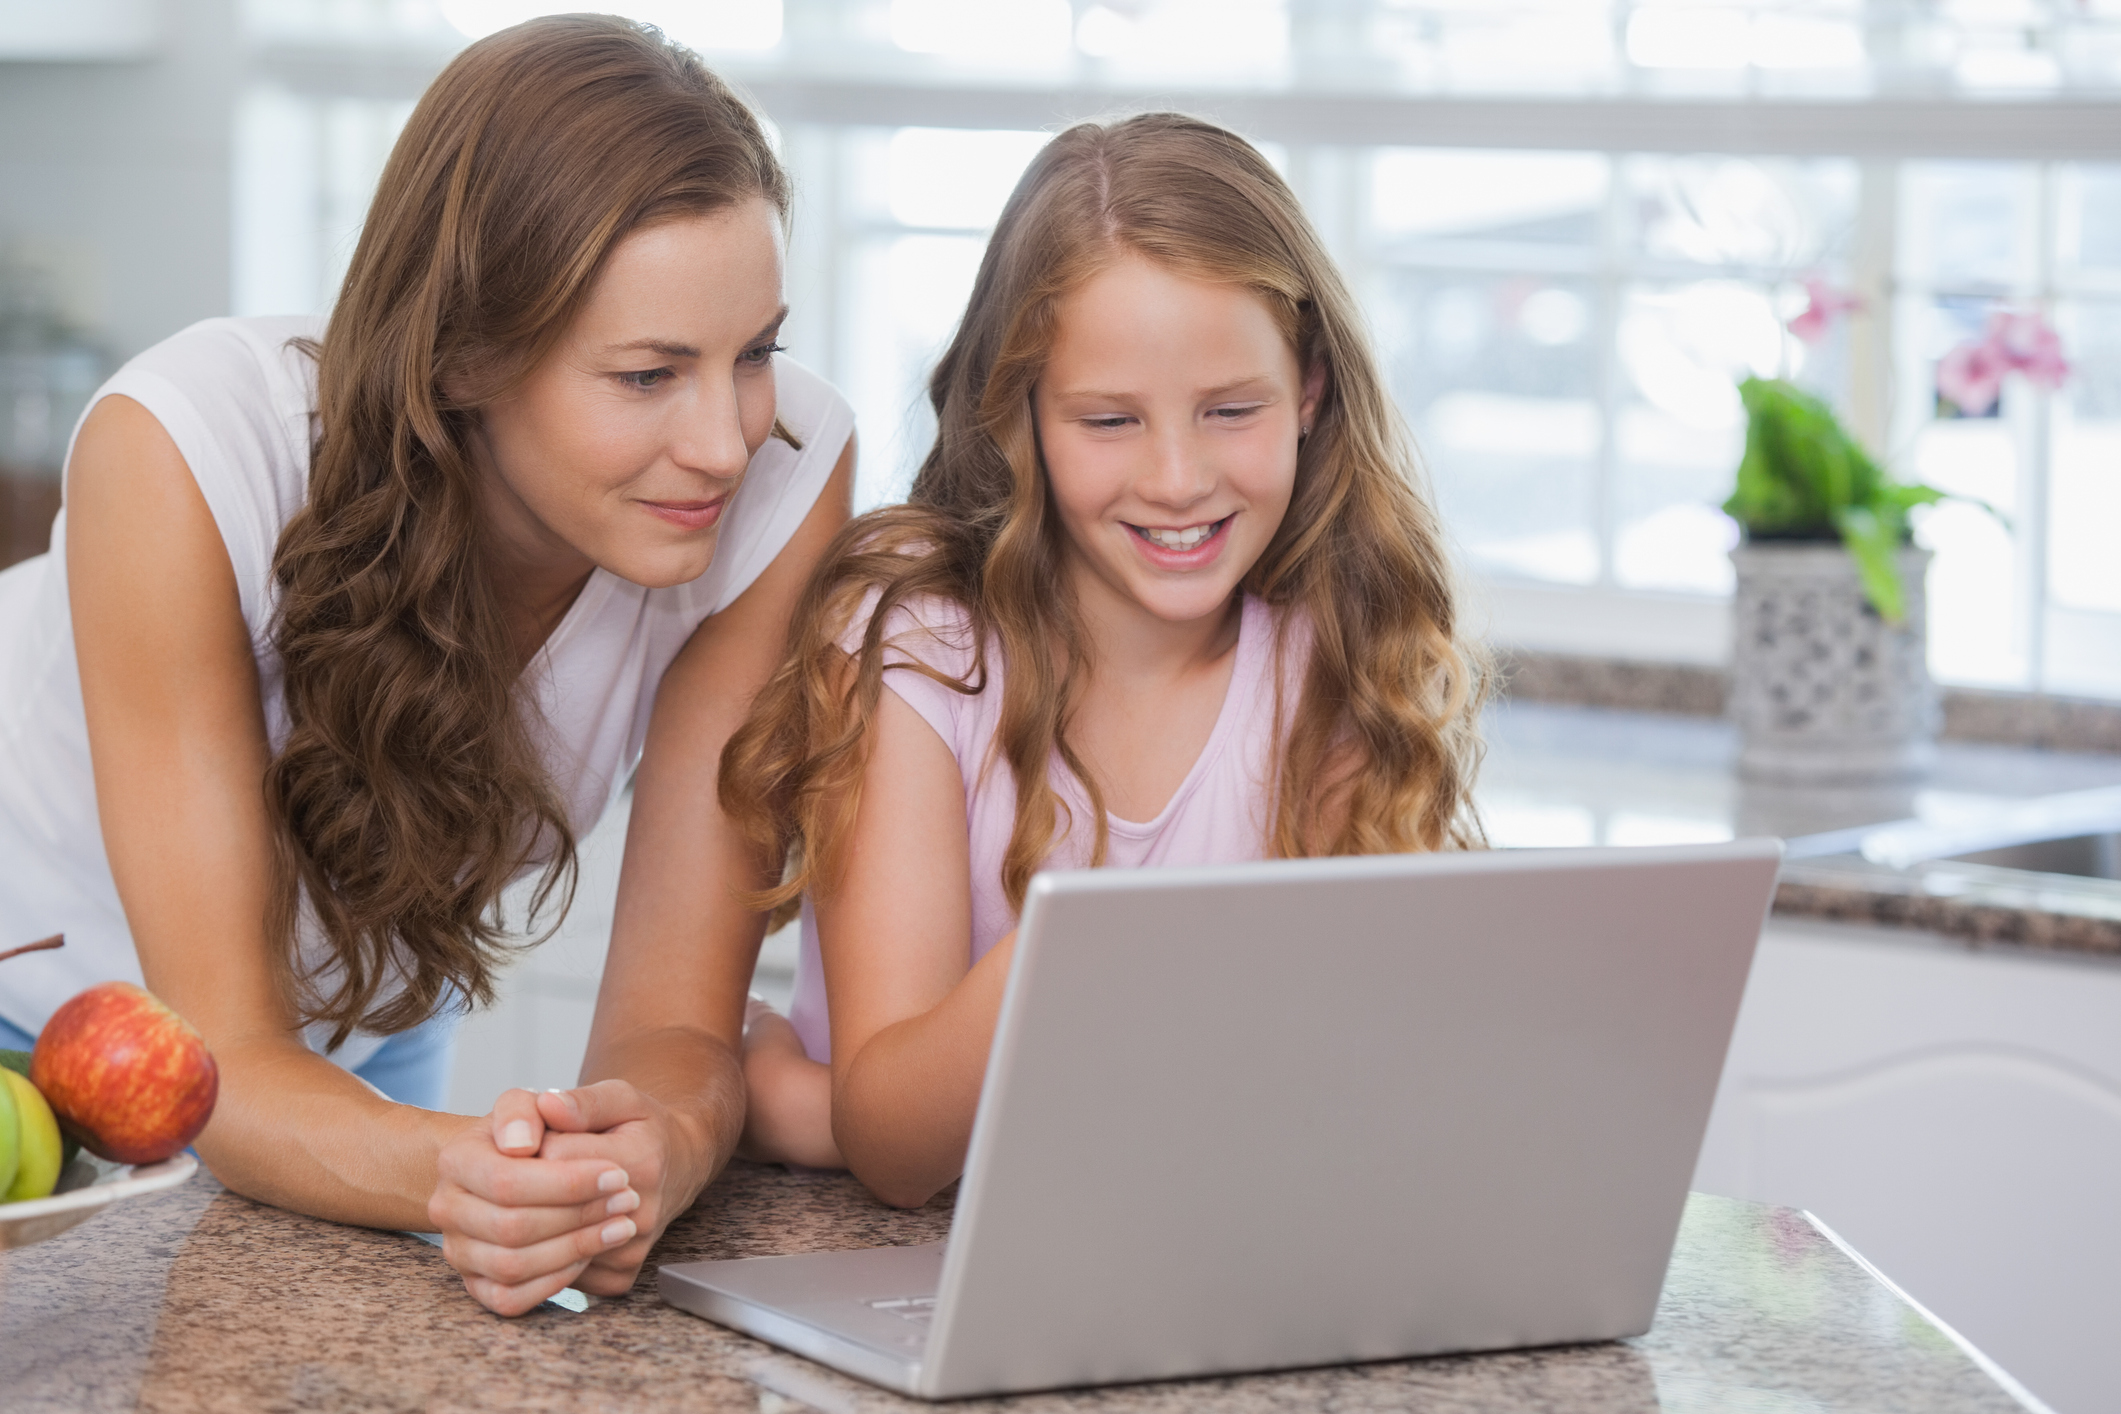 7 Quick Tips to Keep Your Kids Safe Online